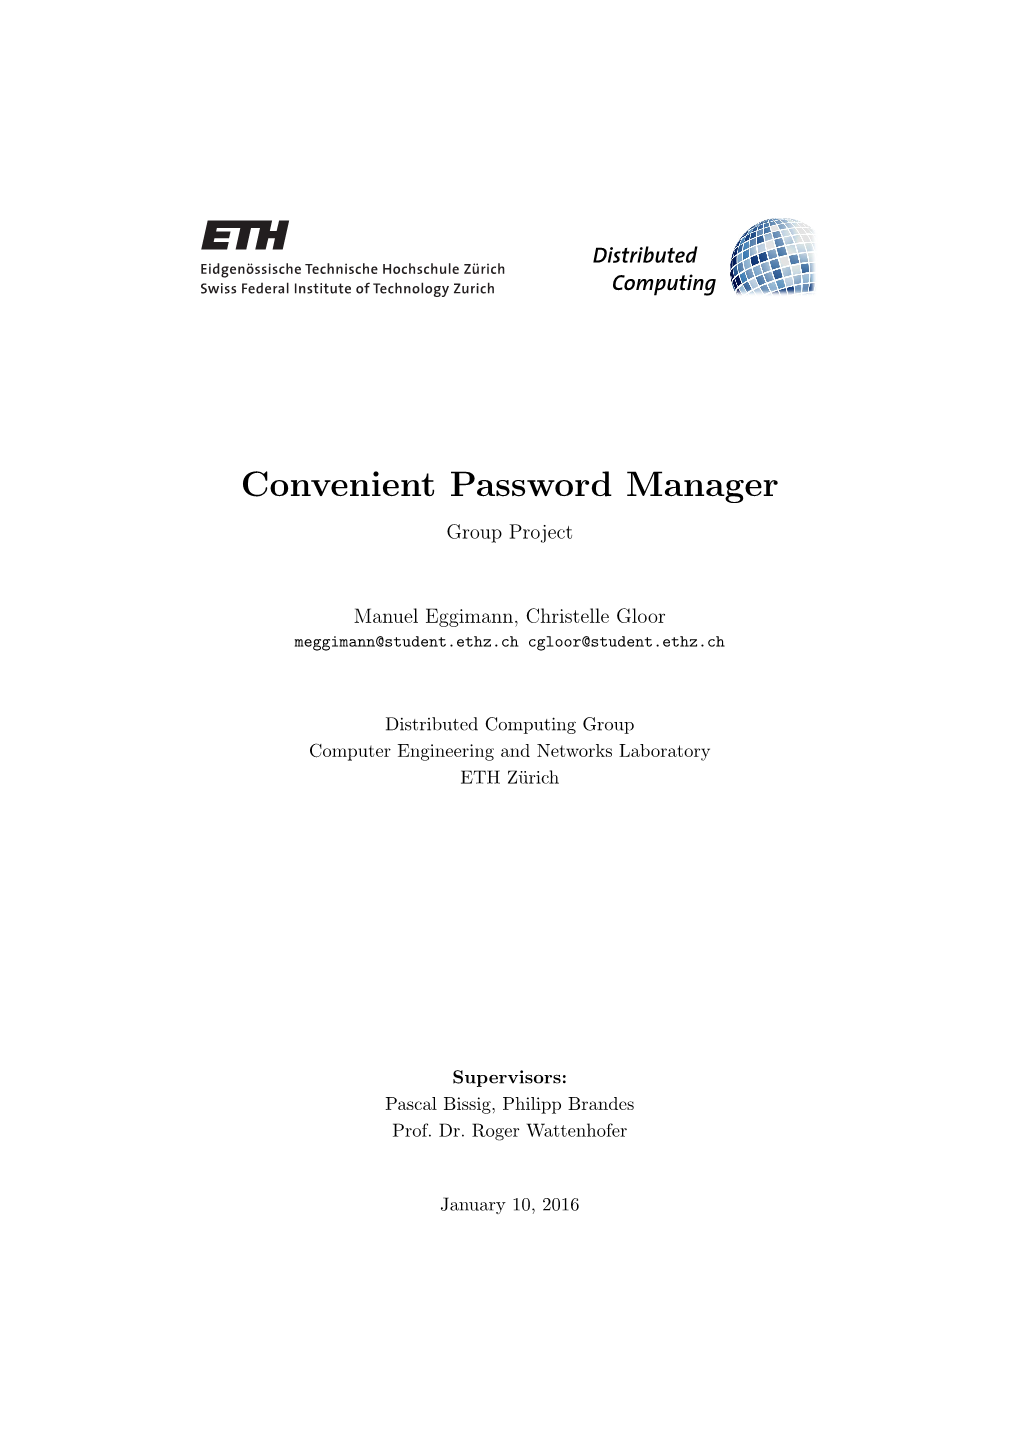 Convenient Password Manager Group Project